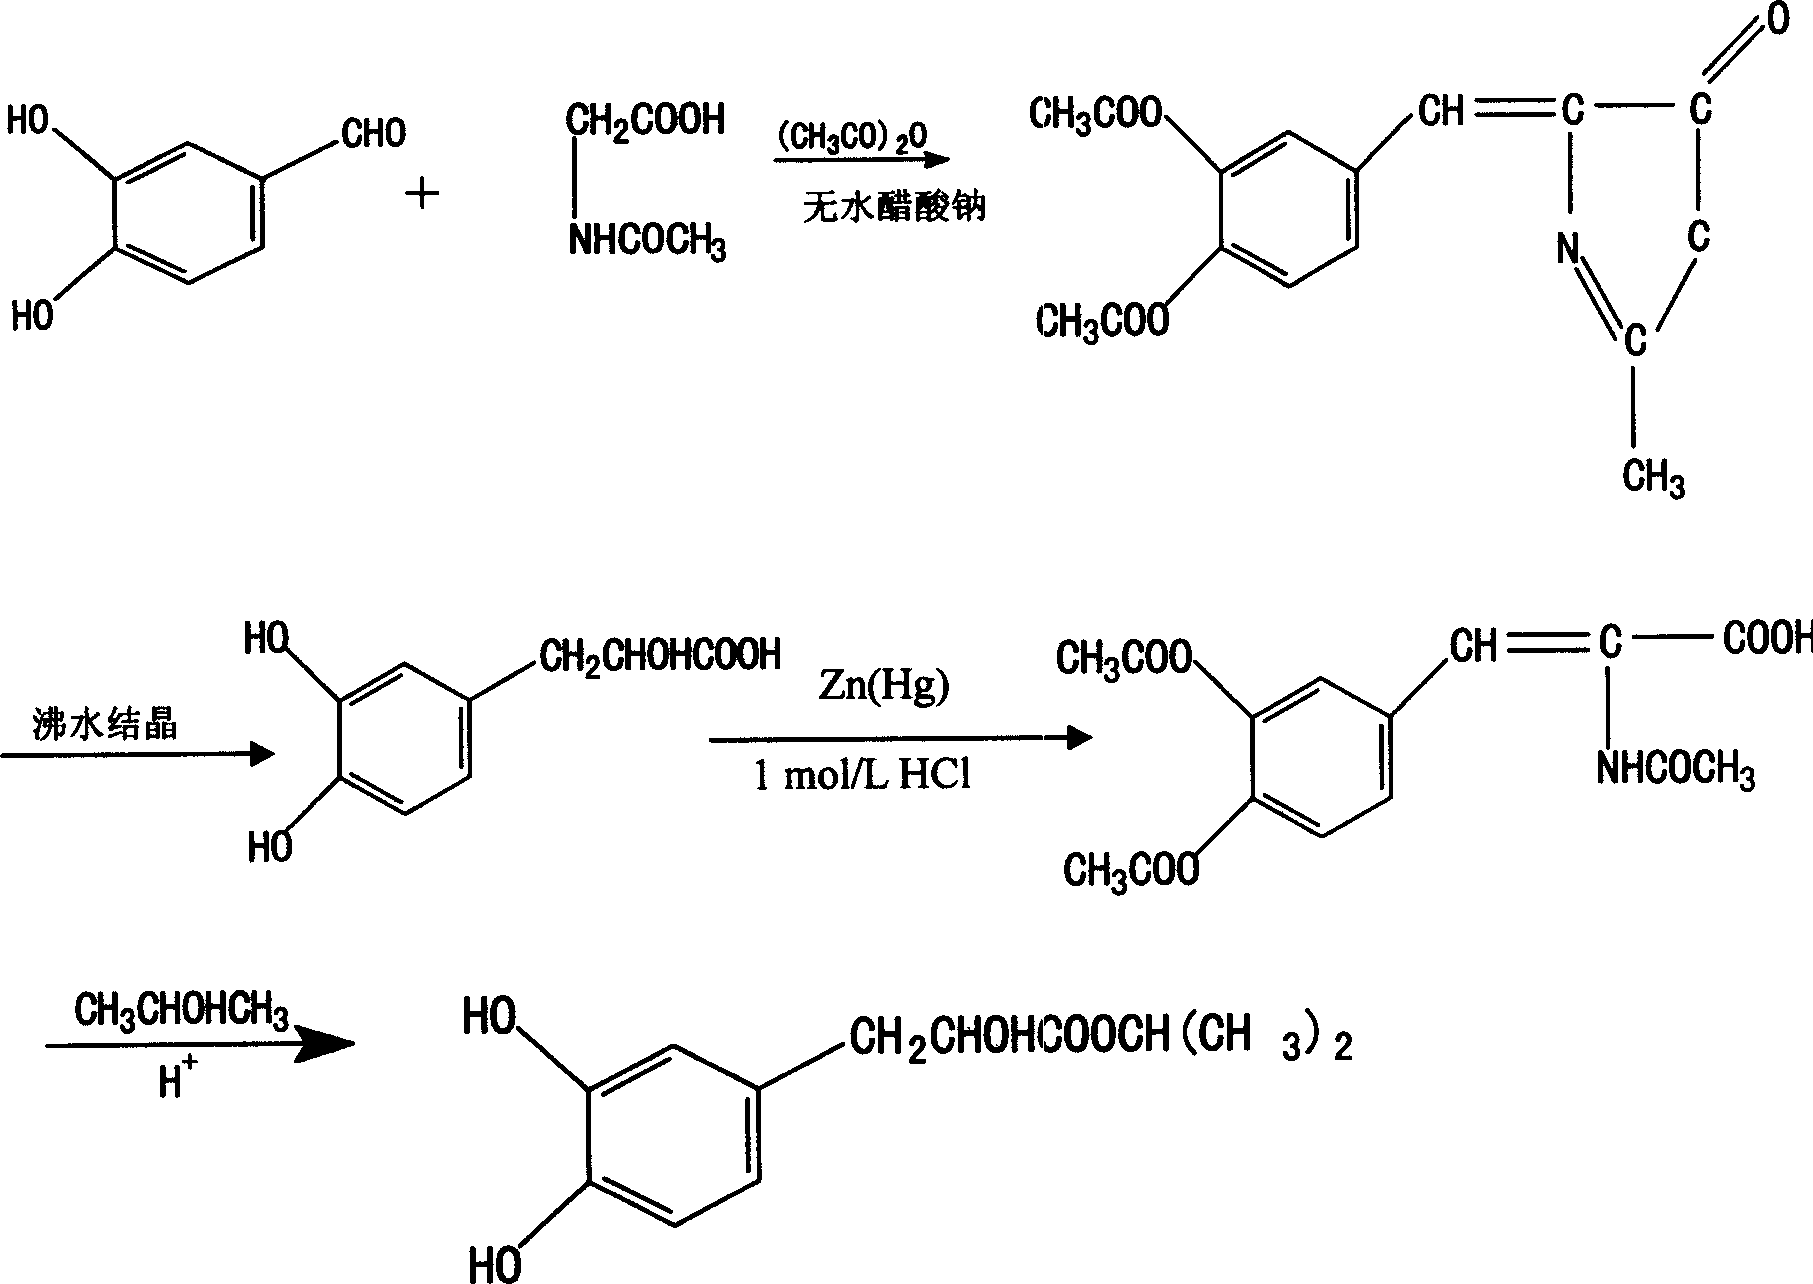 Beta (3,4-dihydroxyphenyl)-alpha-hydroxyisopropyl propionate and its synthesis